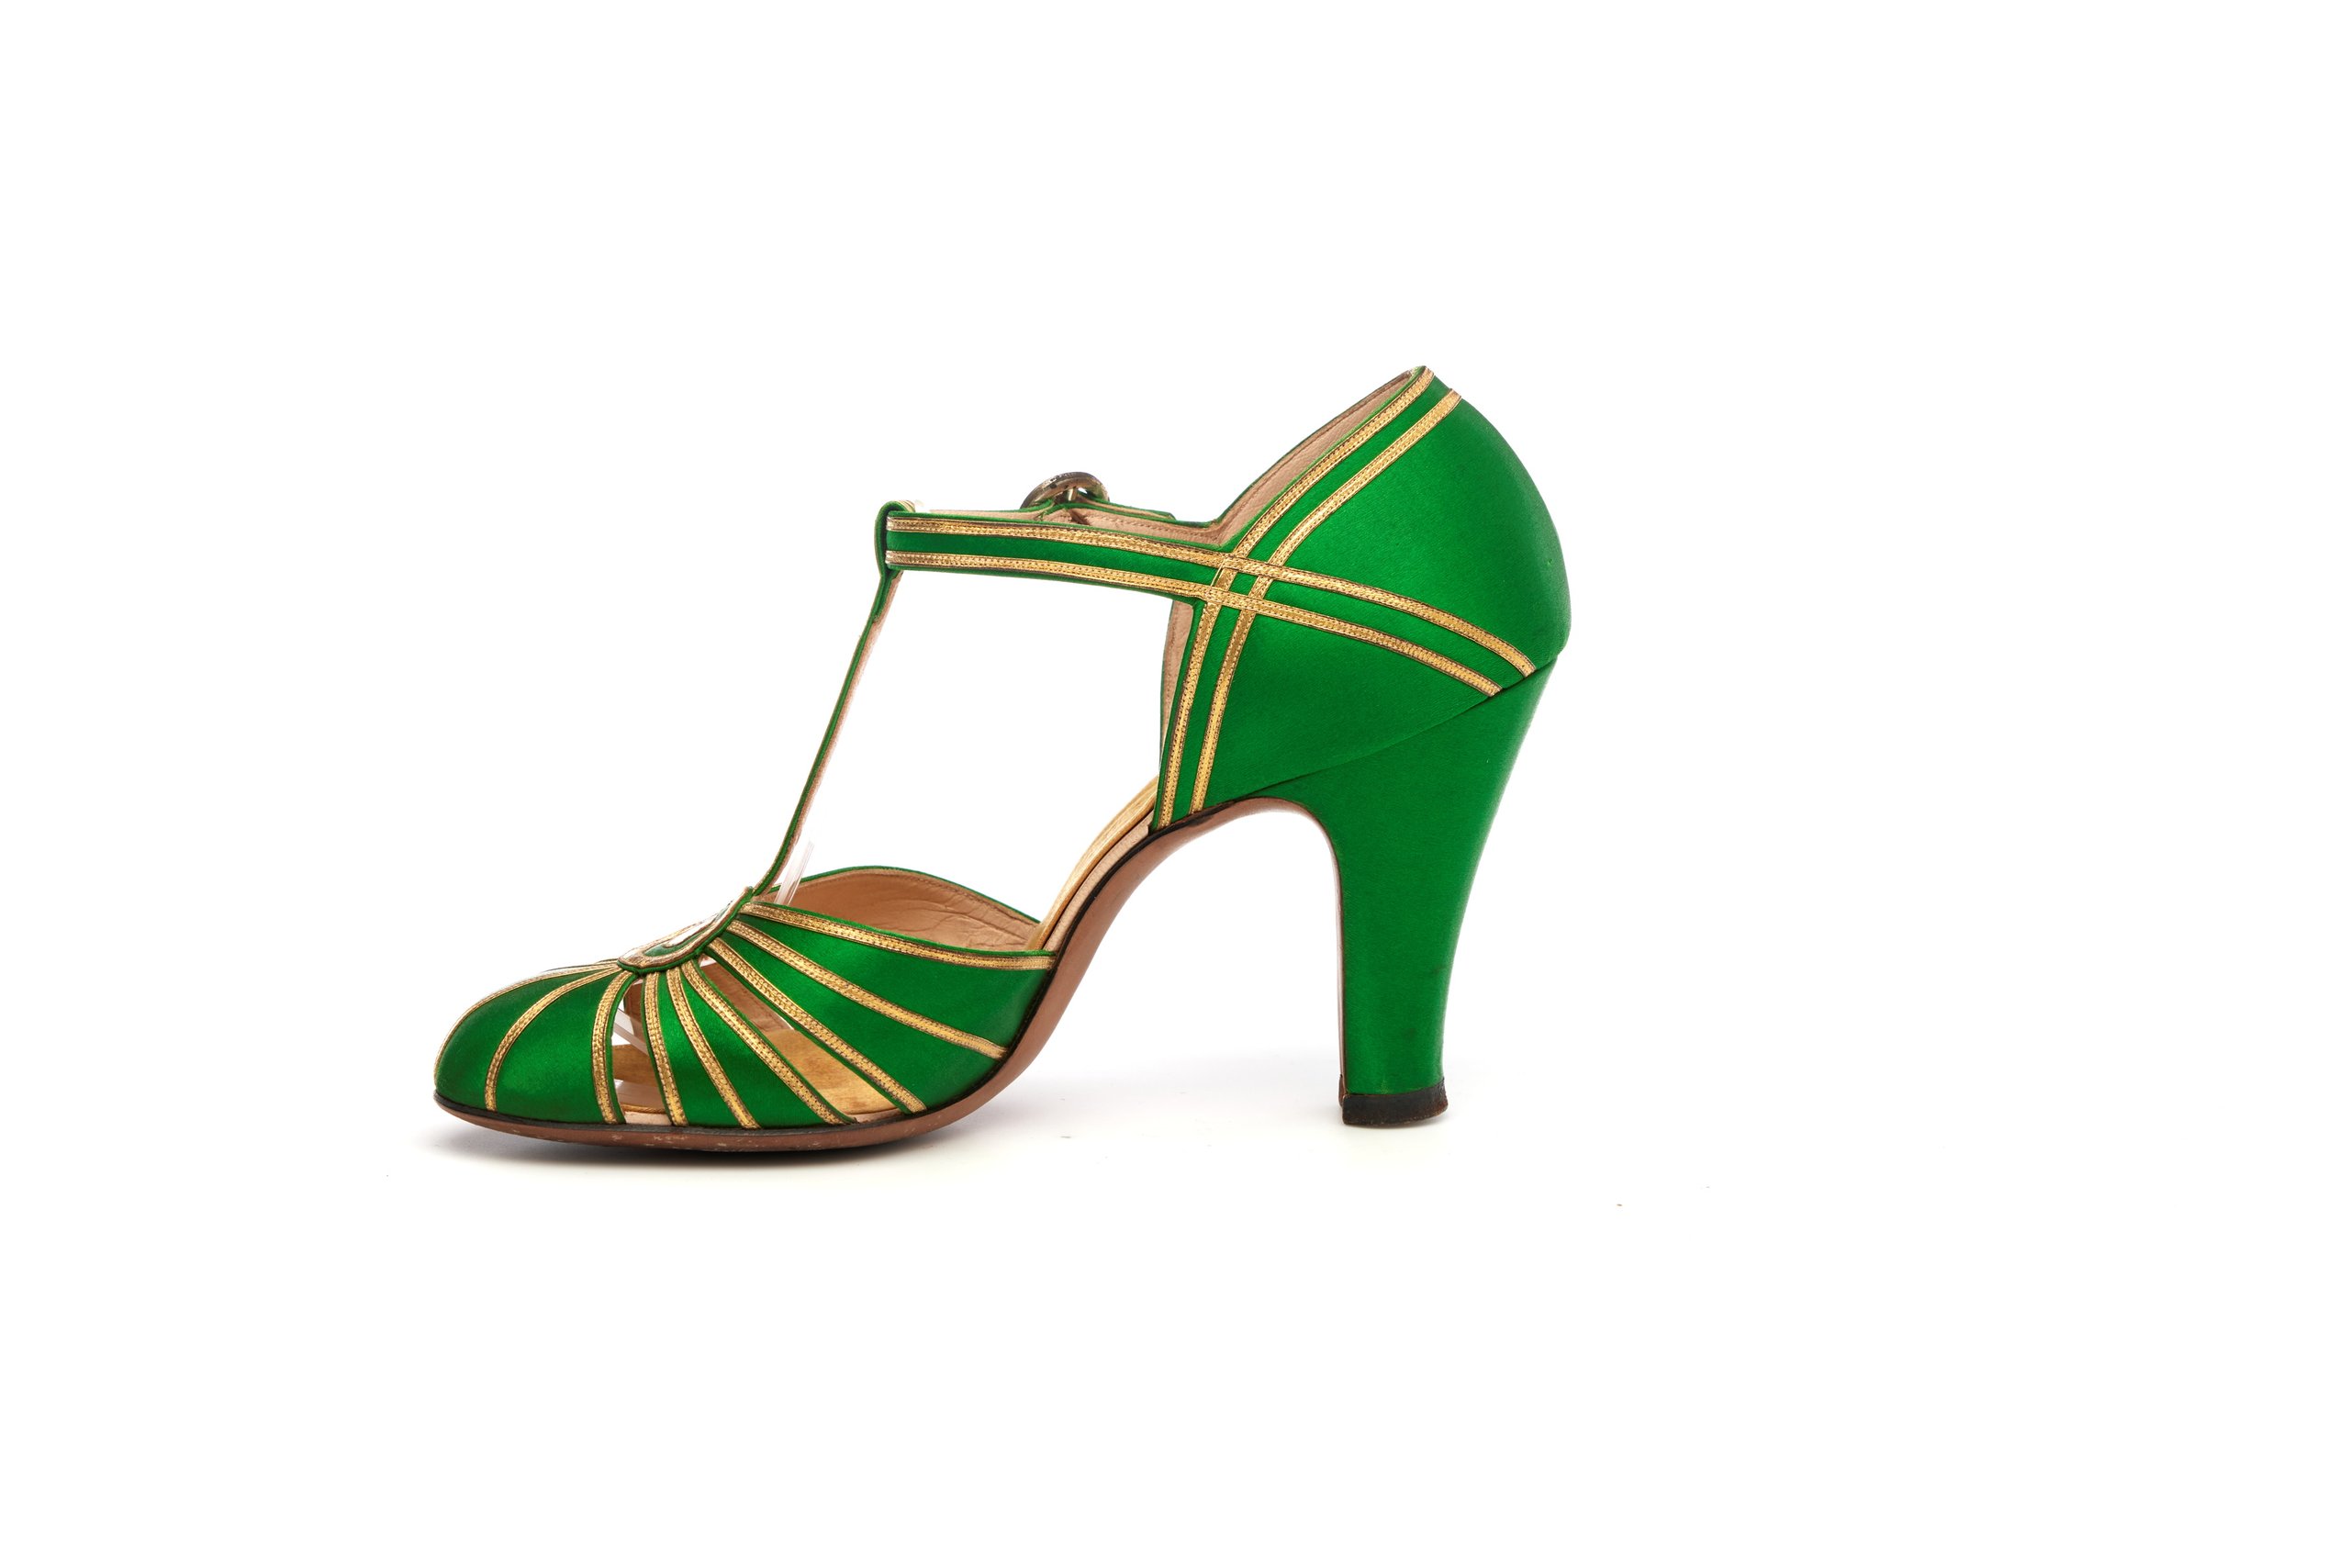 Pair of womens evening shoes by Palter De Liso for David Jones